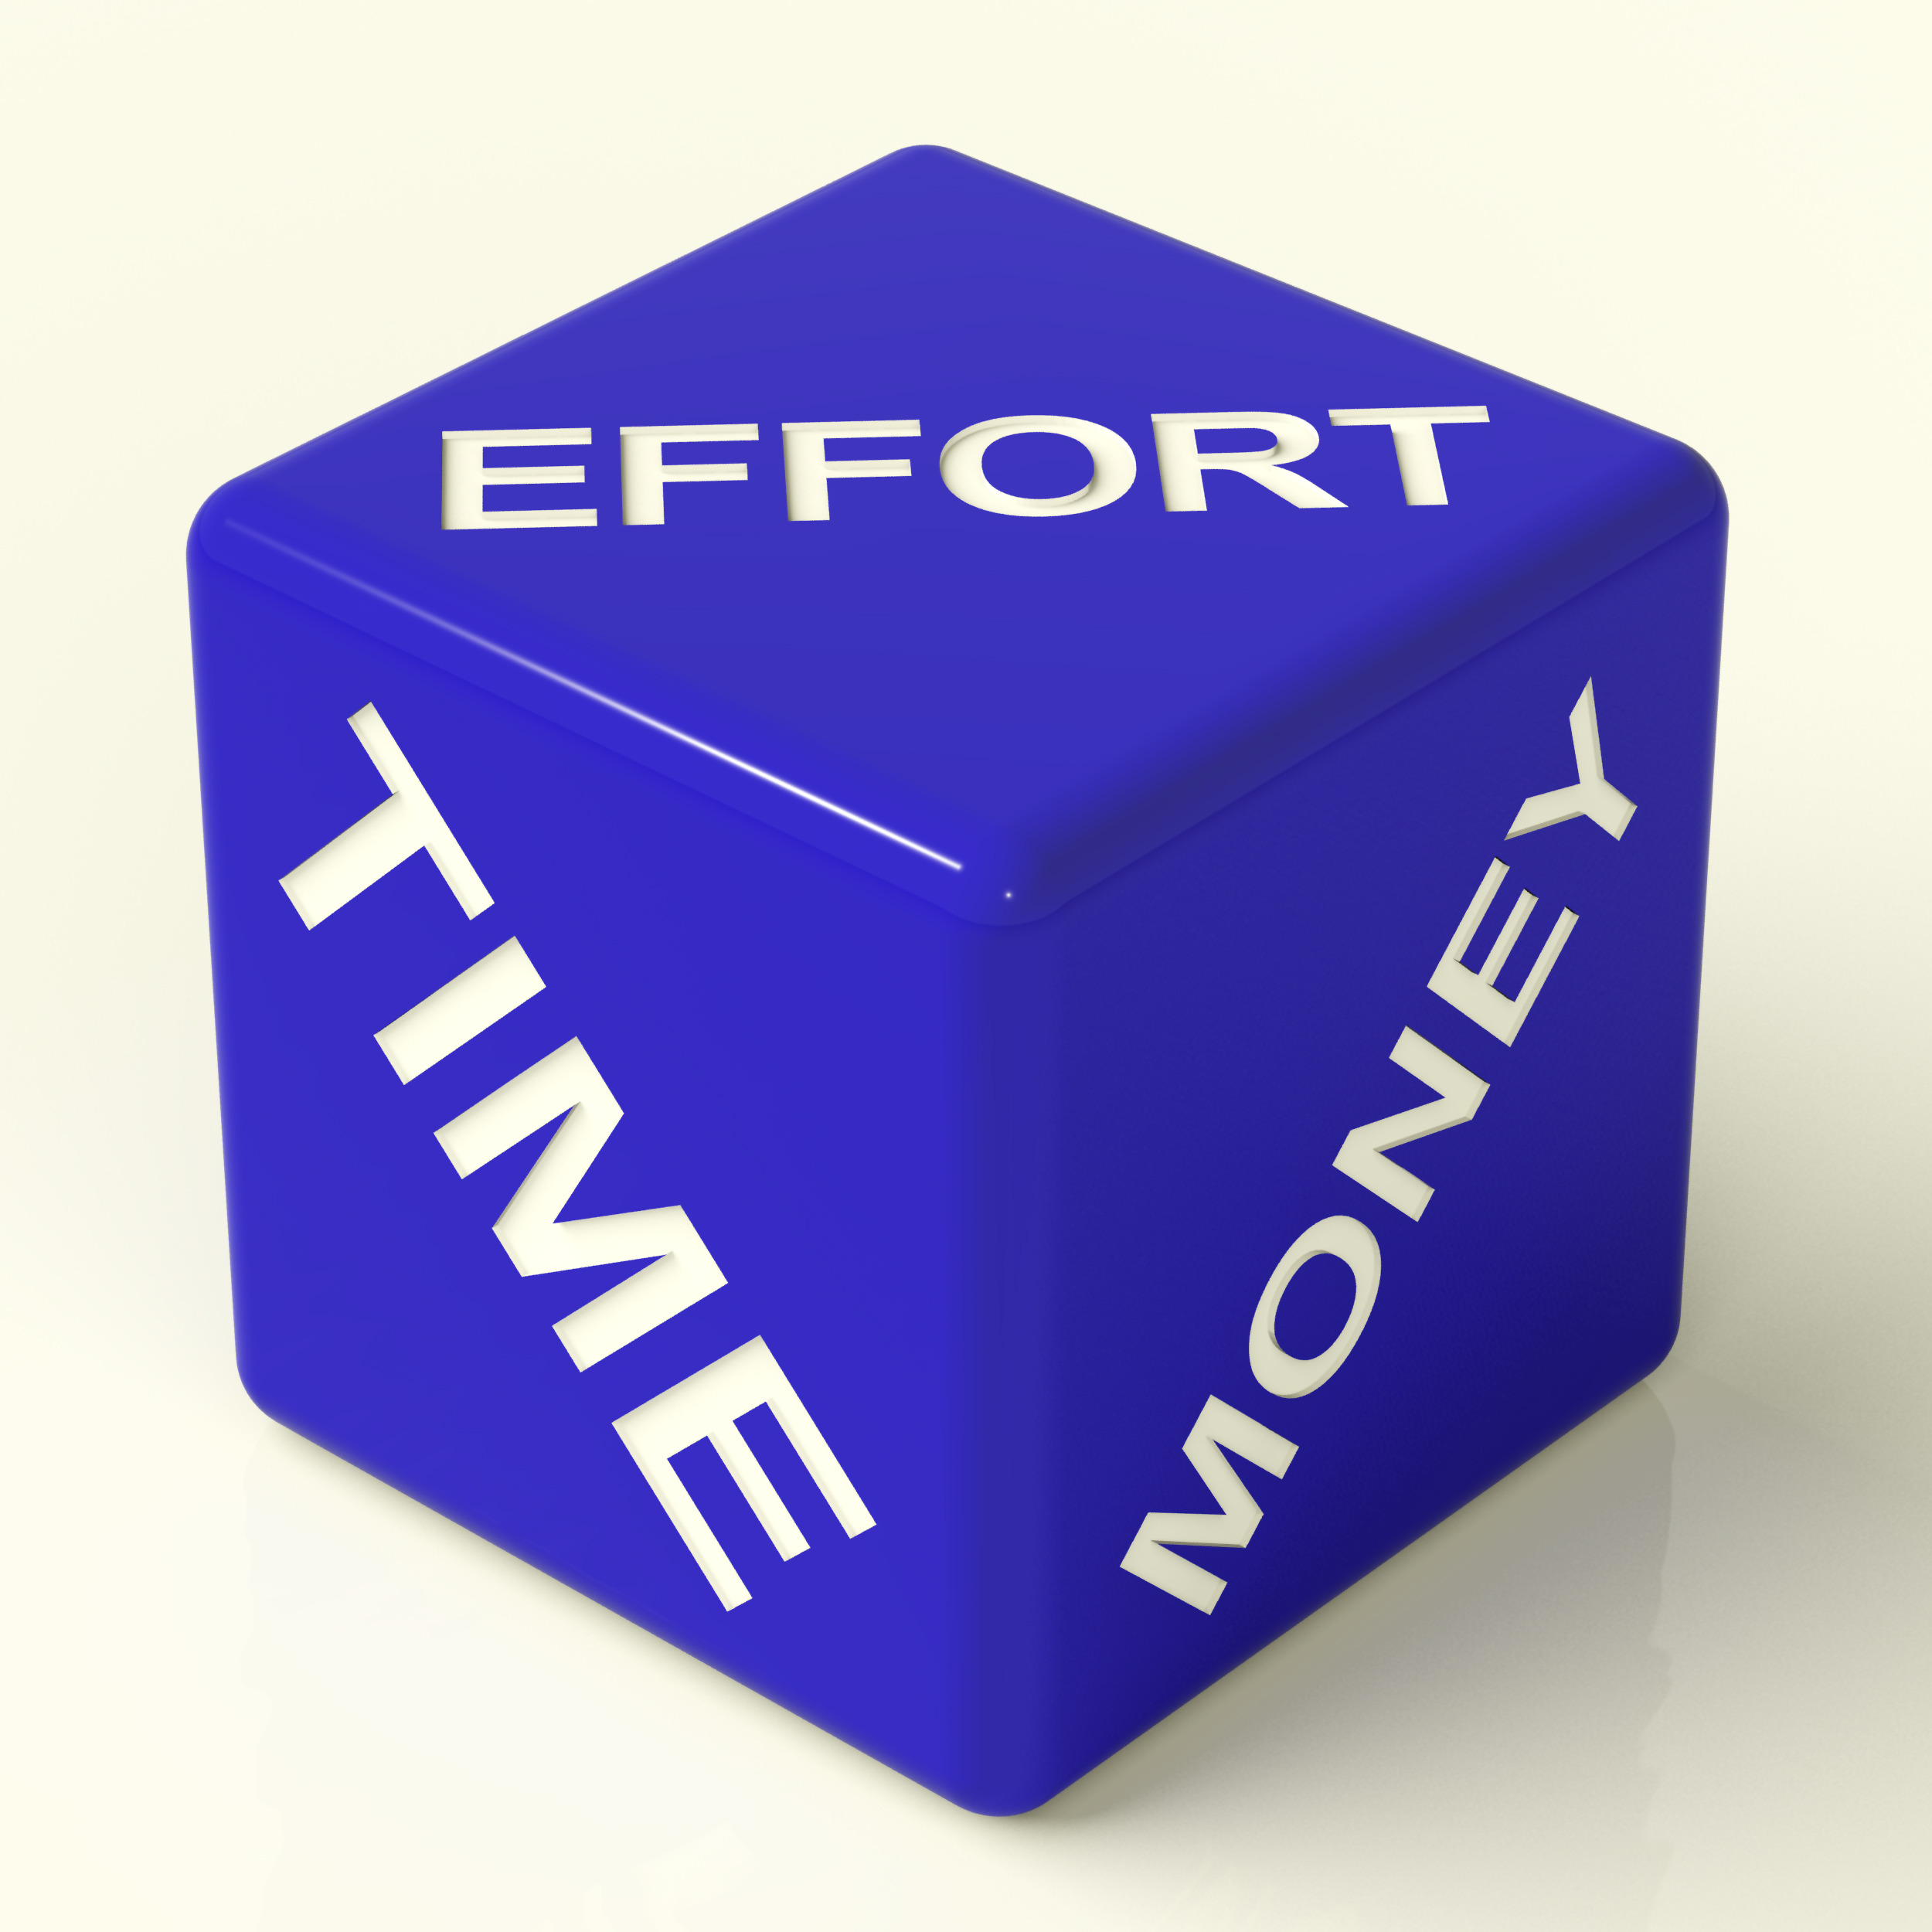 Effort Time Money Blue Dice Representing The Ingredients For Business